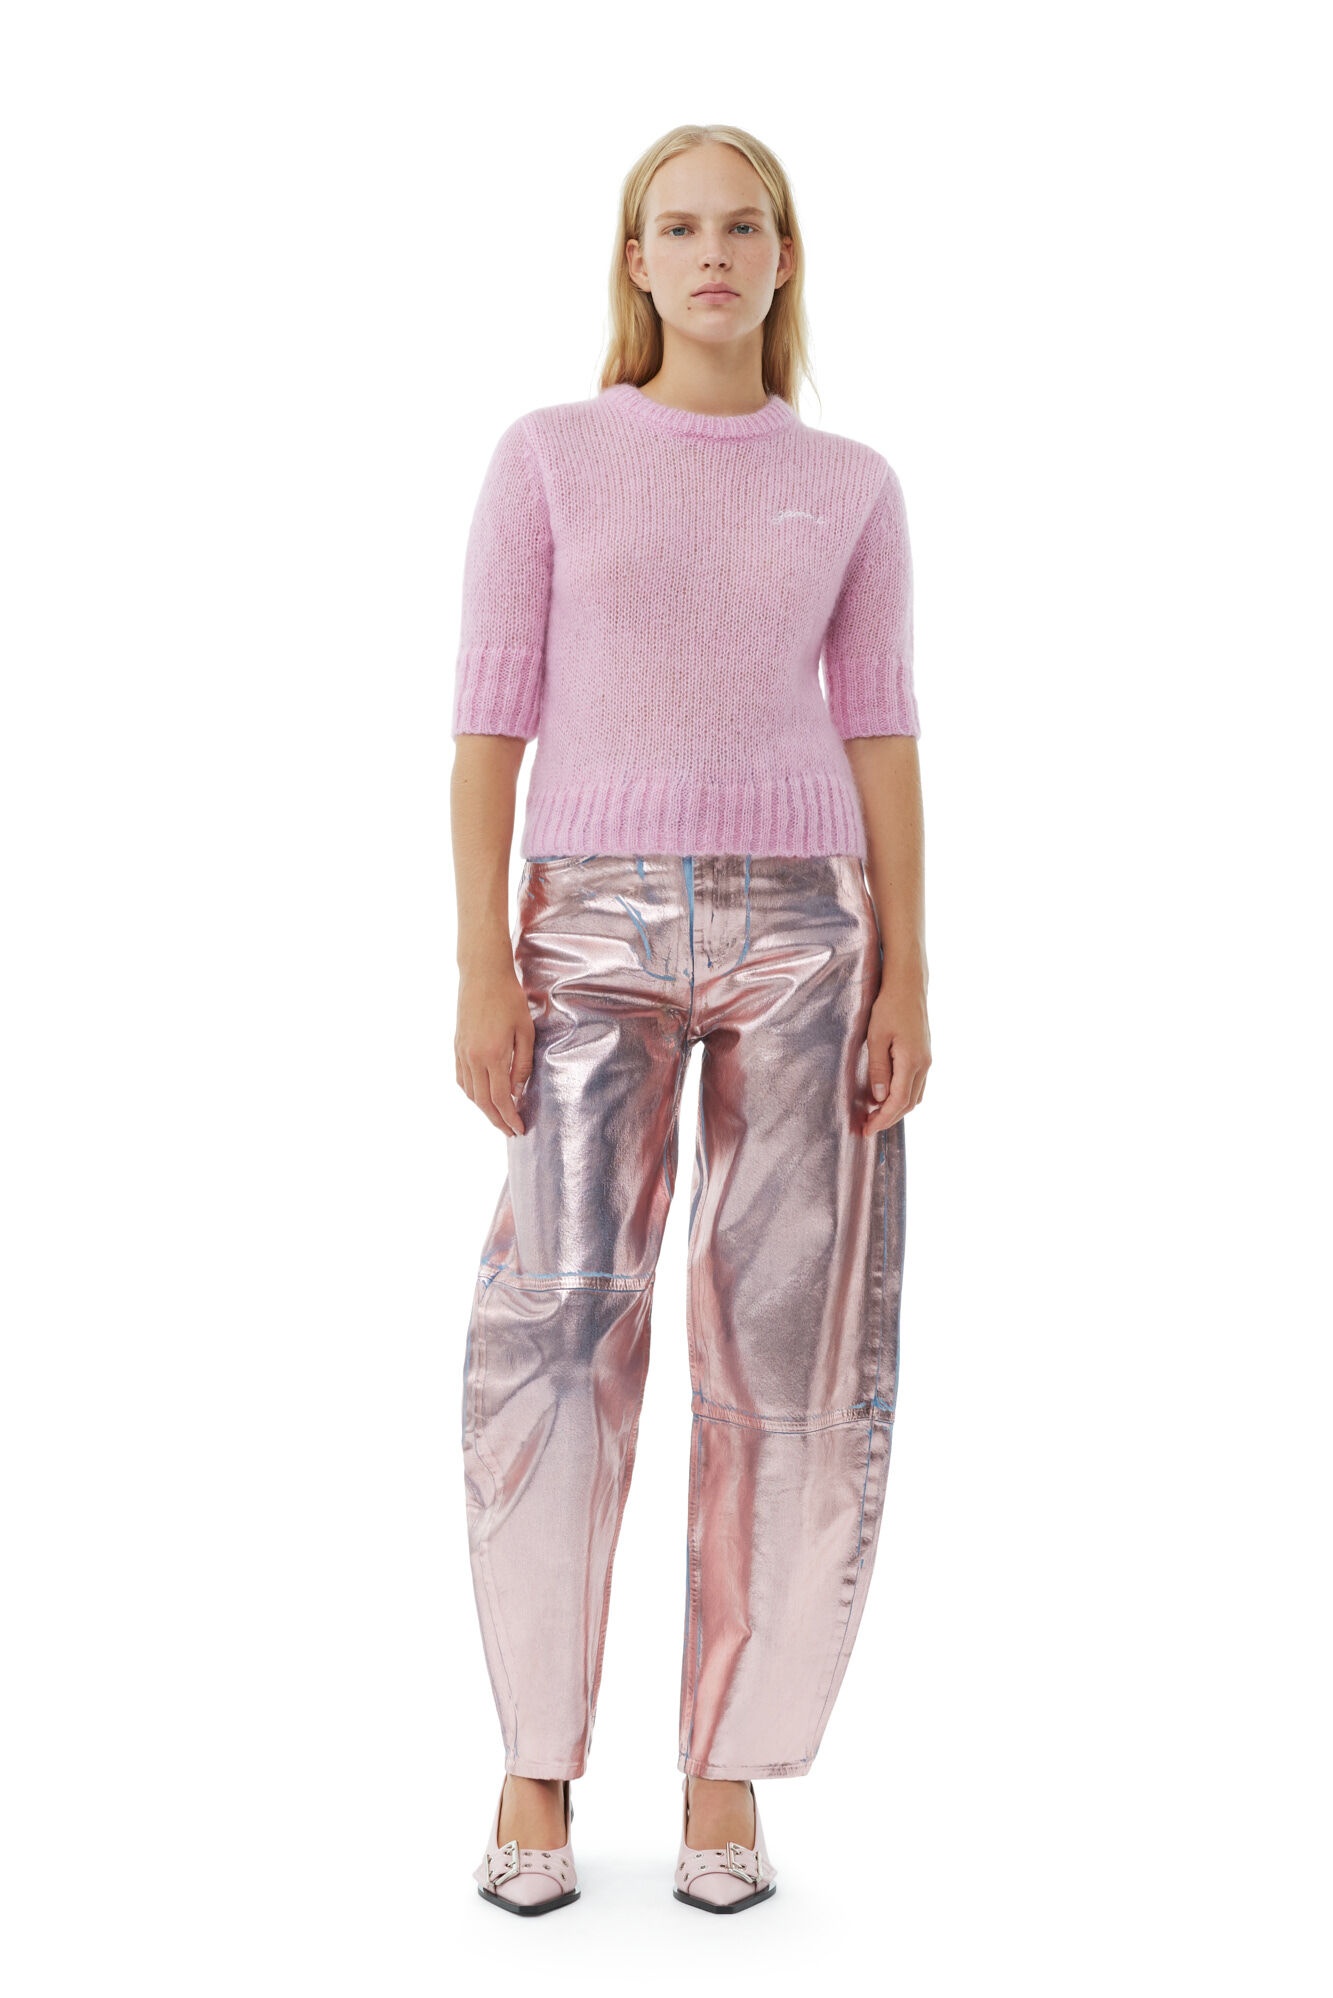 LILAC FOIL STARY JEANS - 3